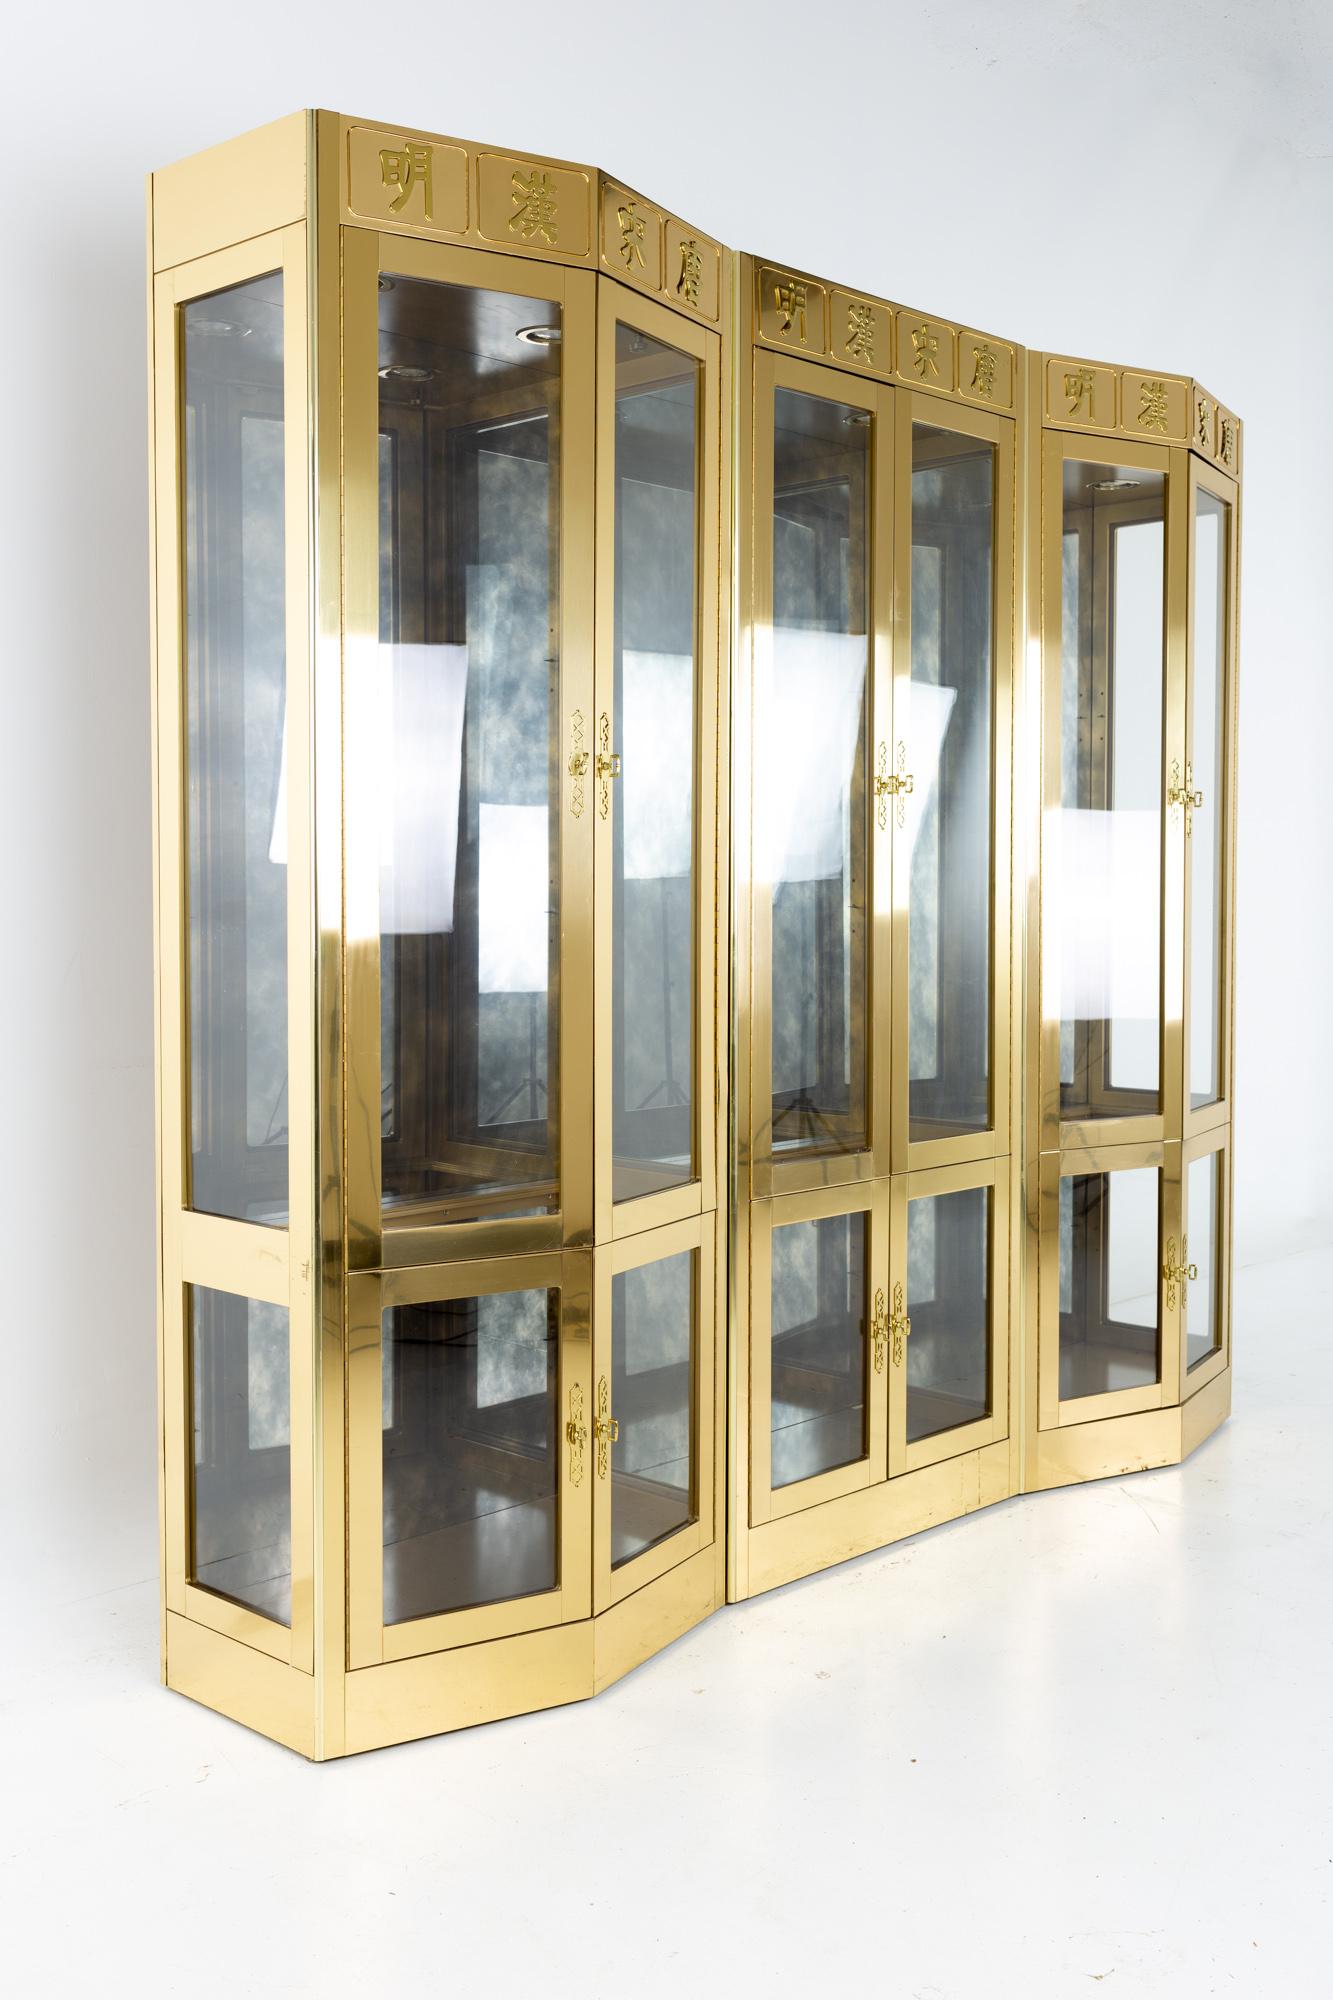 Mastercraft mid century brass display cabinet - set of 3

Each of the two side pieces measure: 32 wide x 19 deep x 85.5 inches high, the center piece measures: 32 wide x 15 deep x 85.5 high; the combined width for the three pieces is 96 inches

All